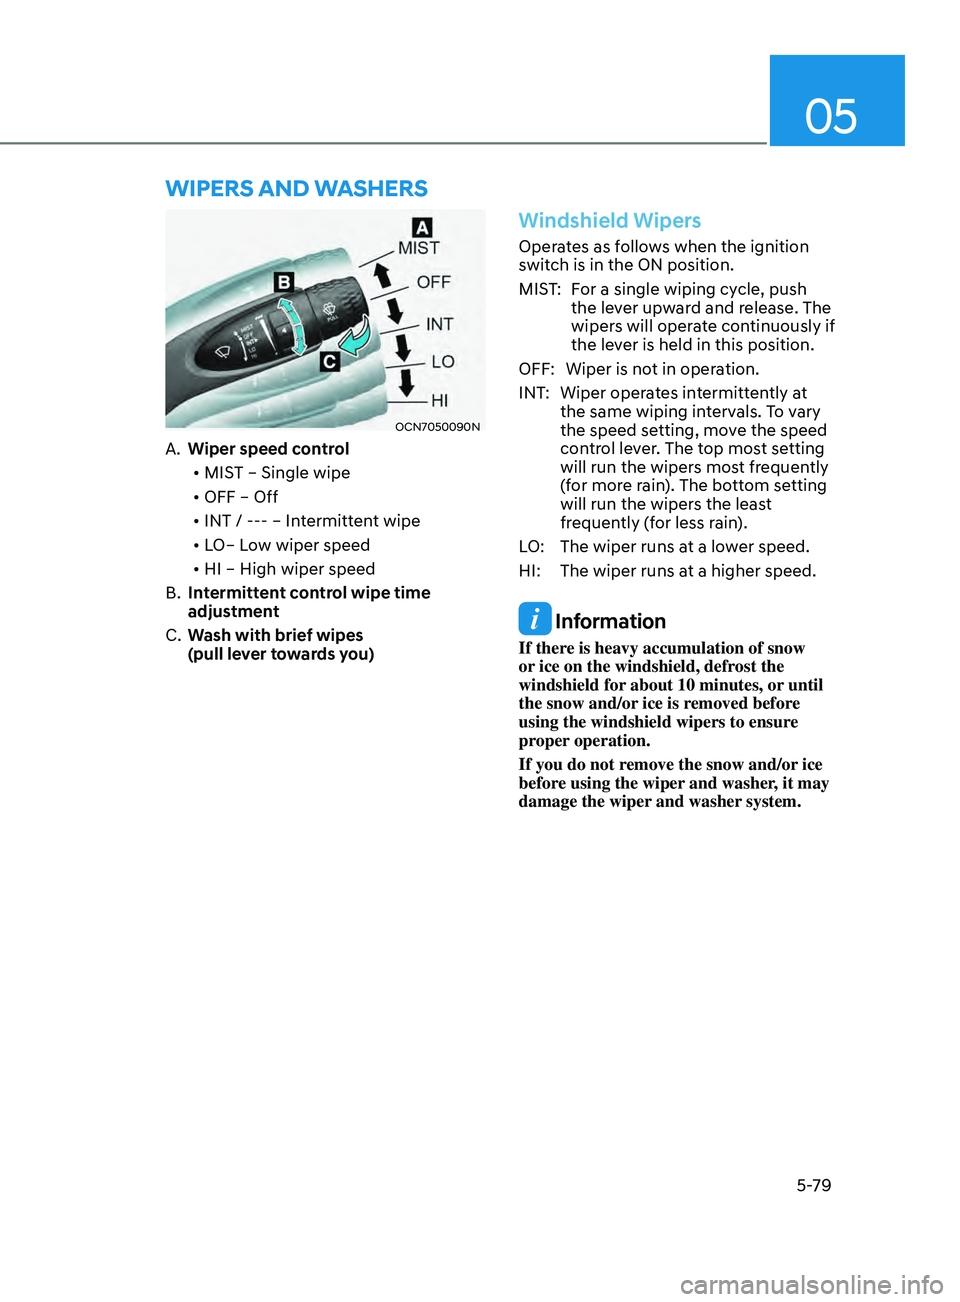 HYUNDAI ELANTRA 2021  Owners Manual 05
5-79
WiperS And WASherS
OCN7050090N
A. Wiper speed control
•	 MIST – Single wipe
•	 OFF – Off
•	 INT / --- – Intermittent wipe  
•	 LO– Low wiper speed
•	 HI – High wiper speed
